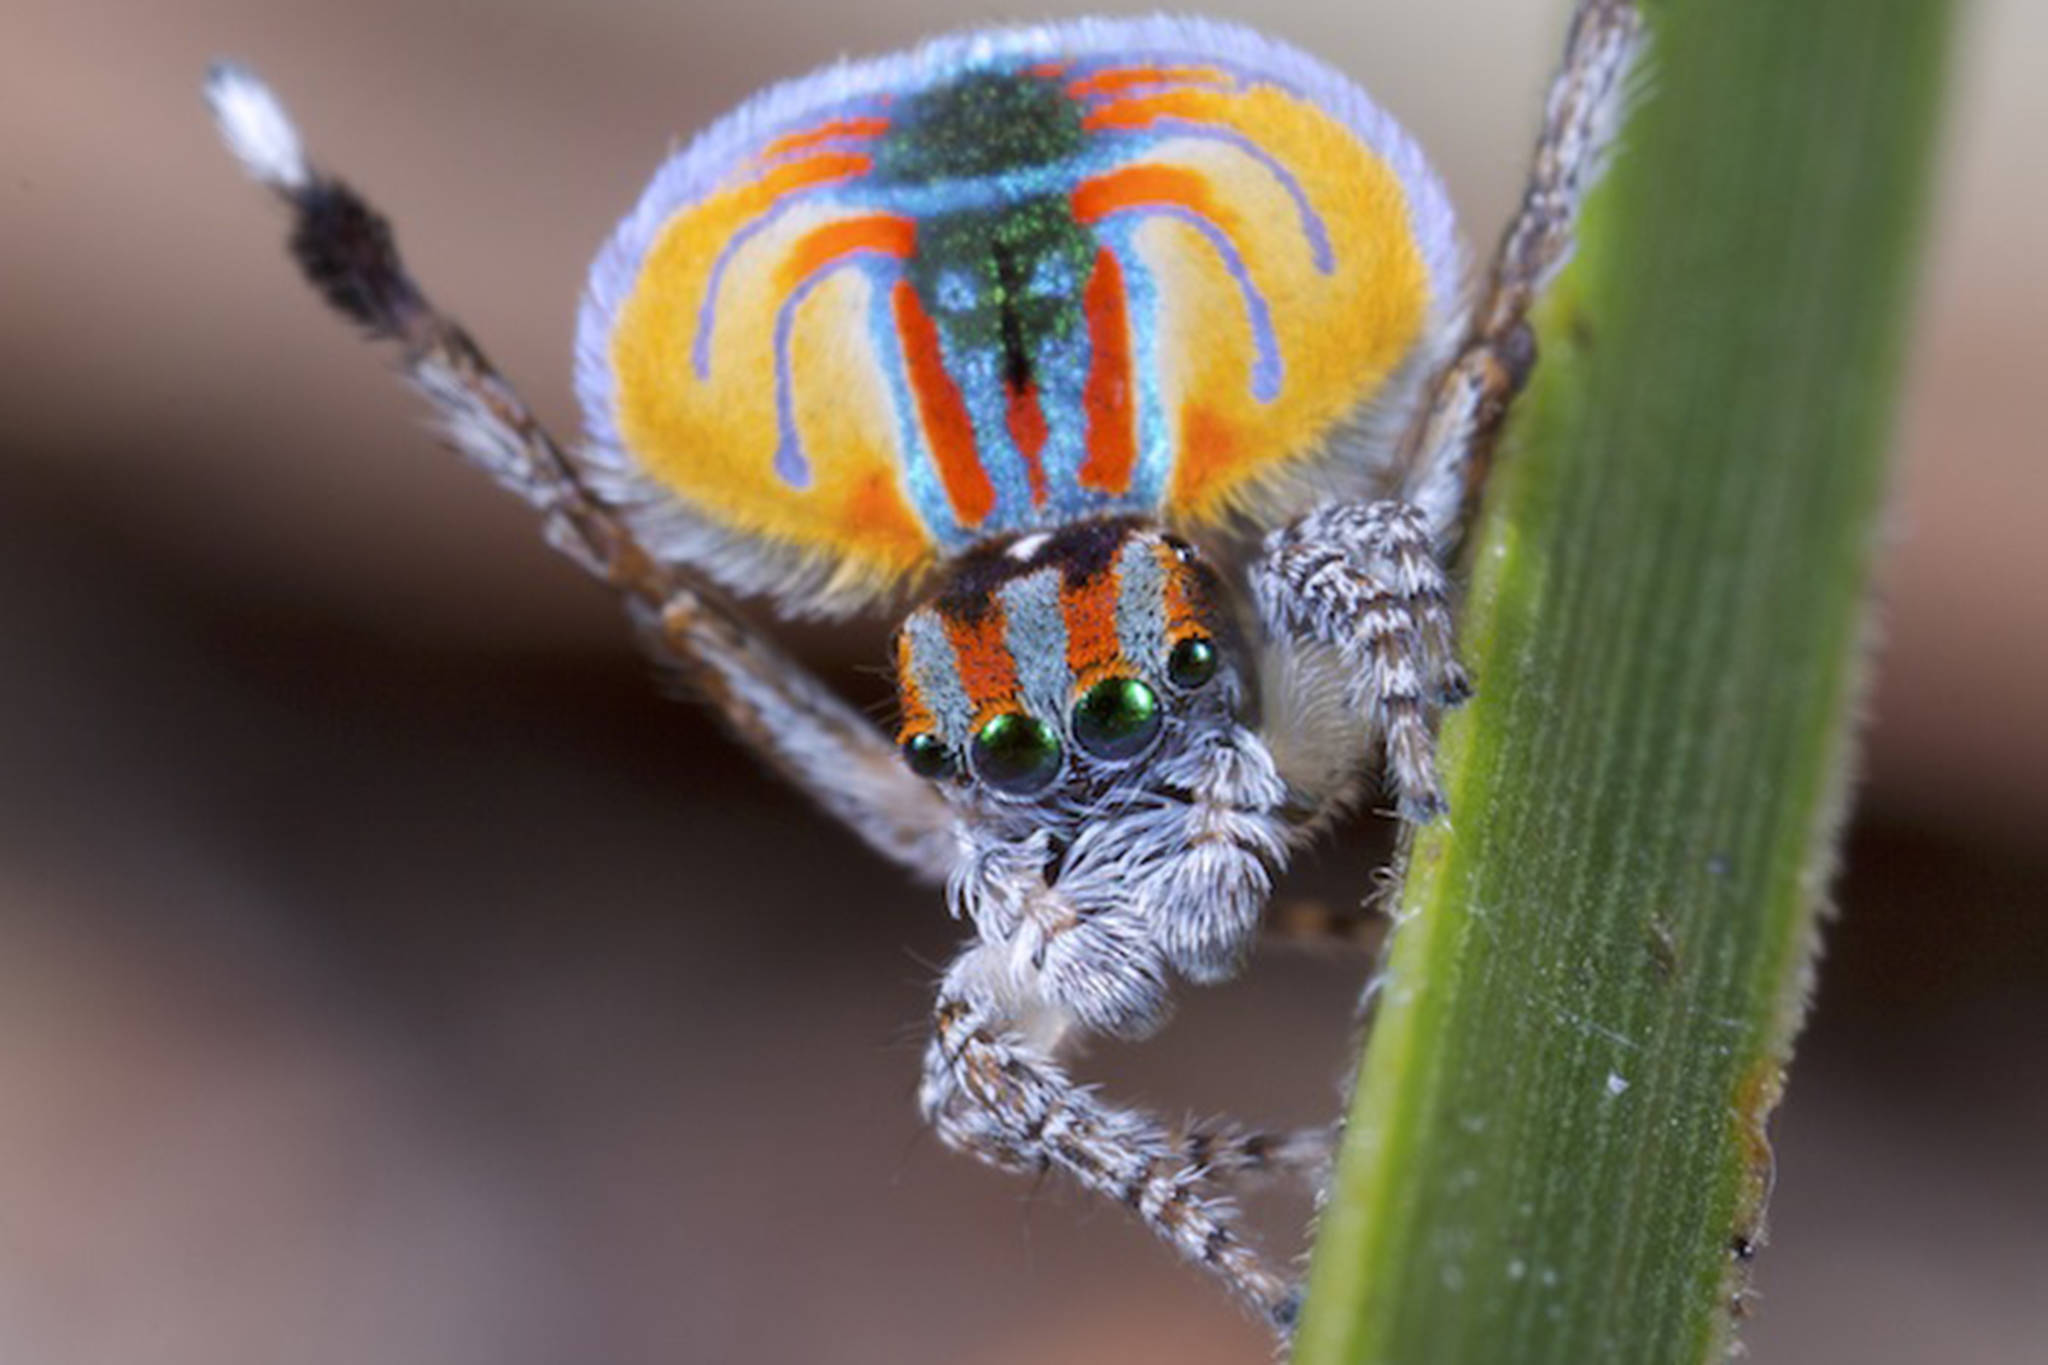 Fantastic spiders and where to find them